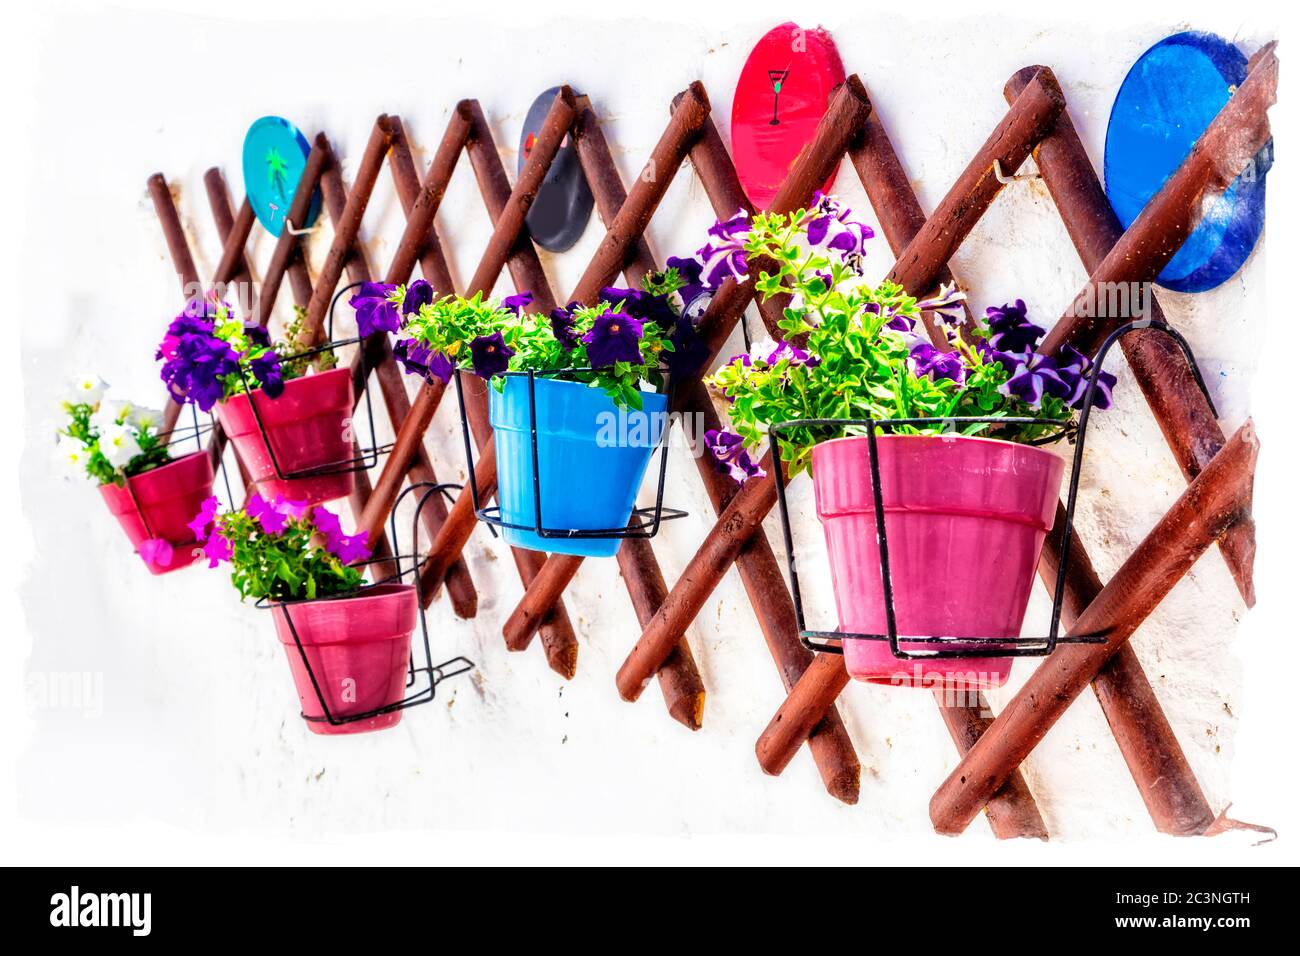 Floral wall decoration in rustic style, Ideas for gardening design Stock Photo